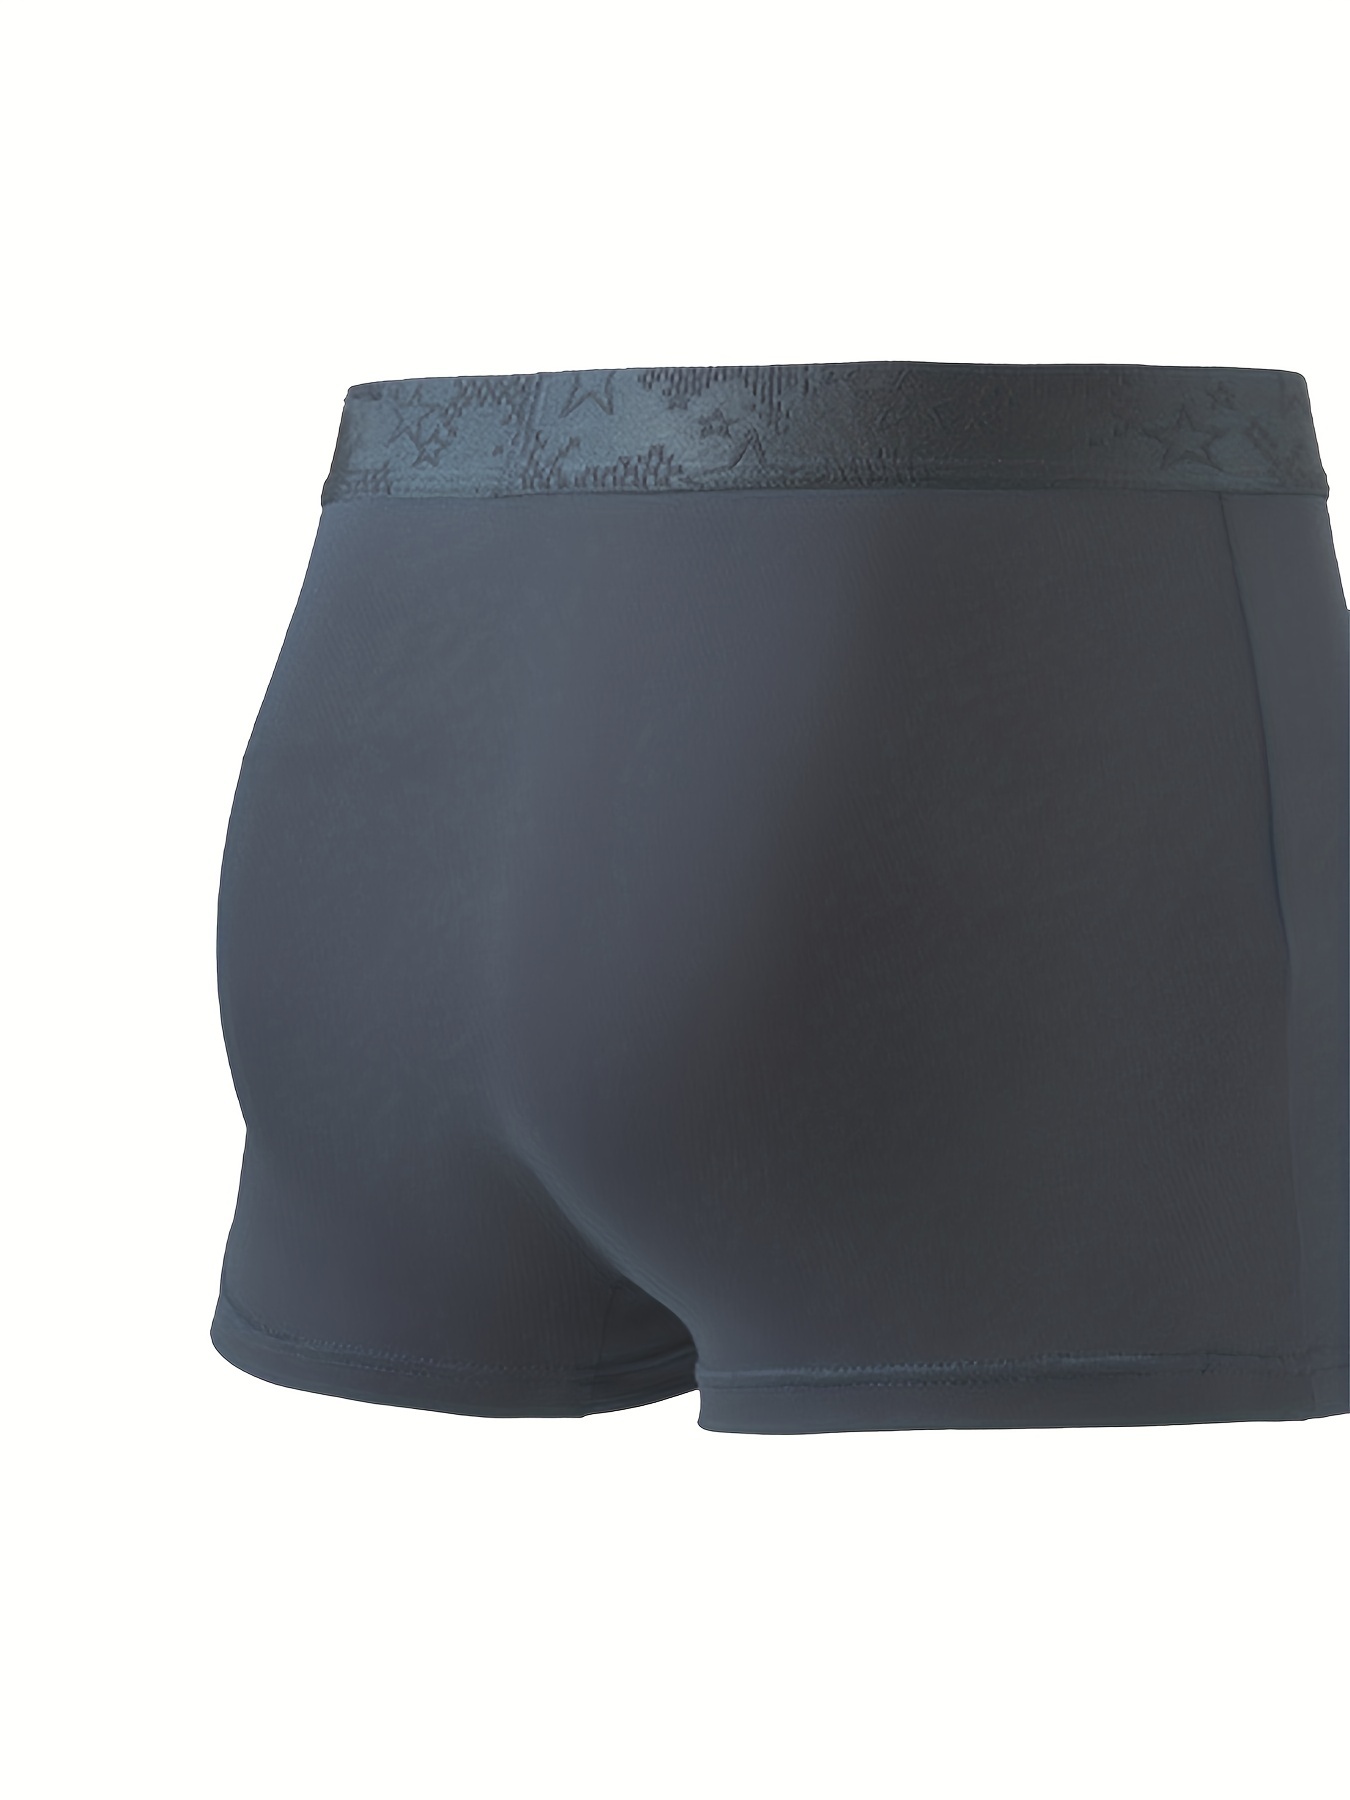 Charcoal Gray Lace Boxer Short